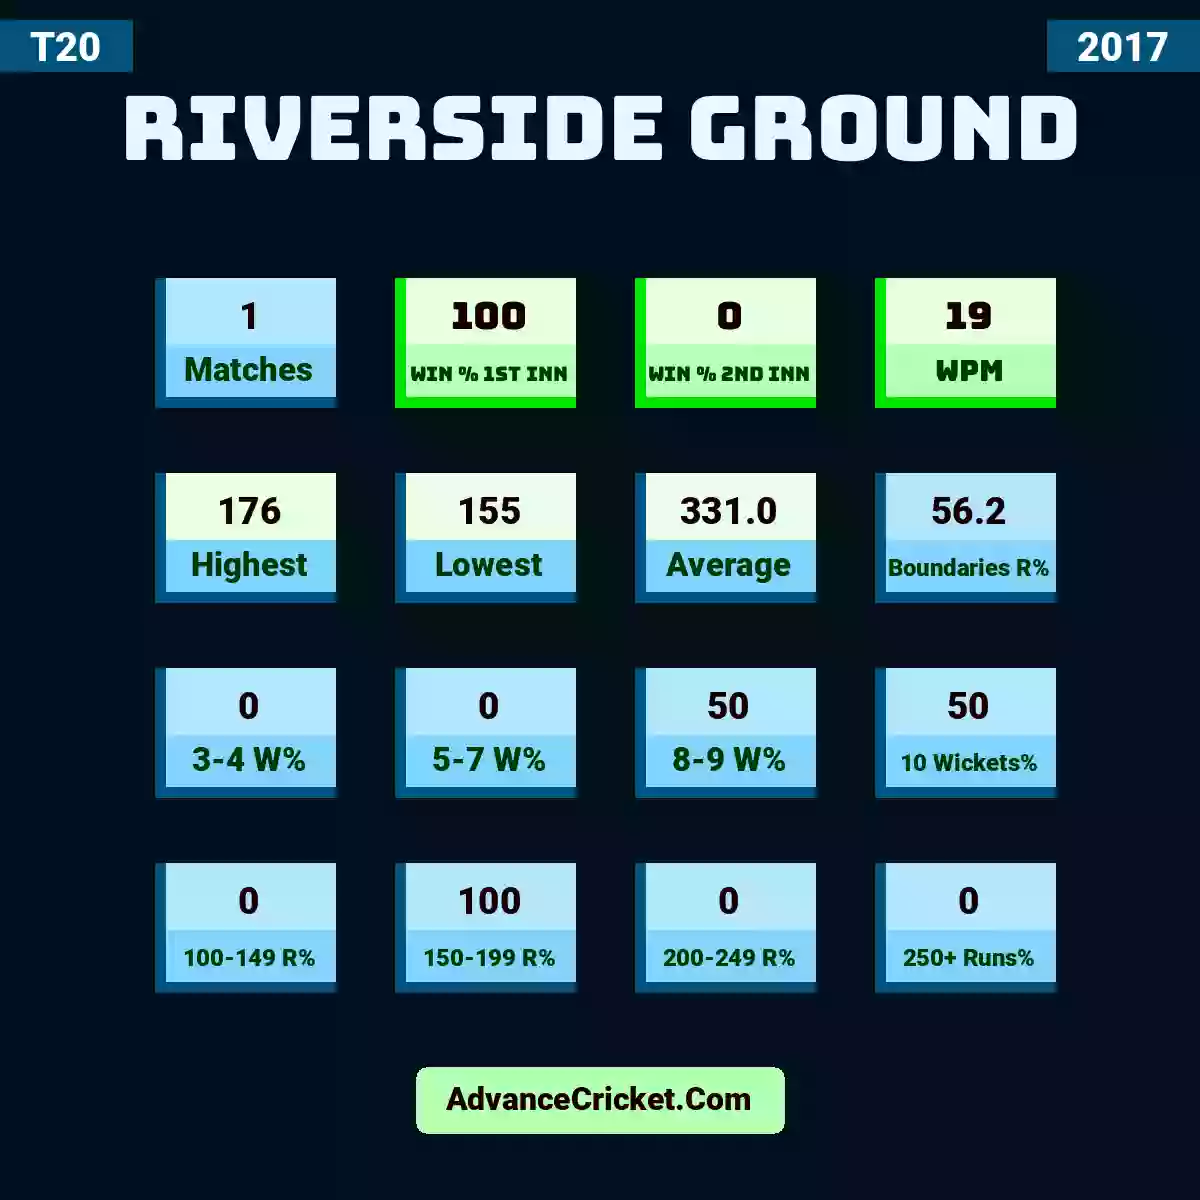 Image showing Riverside Ground with Matches: 1, Win % 1st Inn: 100, Win % 2nd Inn: 0, WPM: 19, Highest: 176, Lowest: 155, Average: 331.0, Boundaries R%: 56.2, 3-4 W%: 0, 5-7 W%: 0, 8-9 W%: 50, 10 Wickets%: 50, 100-149 R%: 0, 150-199 R%: 100, 200-249 R%: 0, 250+ Runs%: 0.